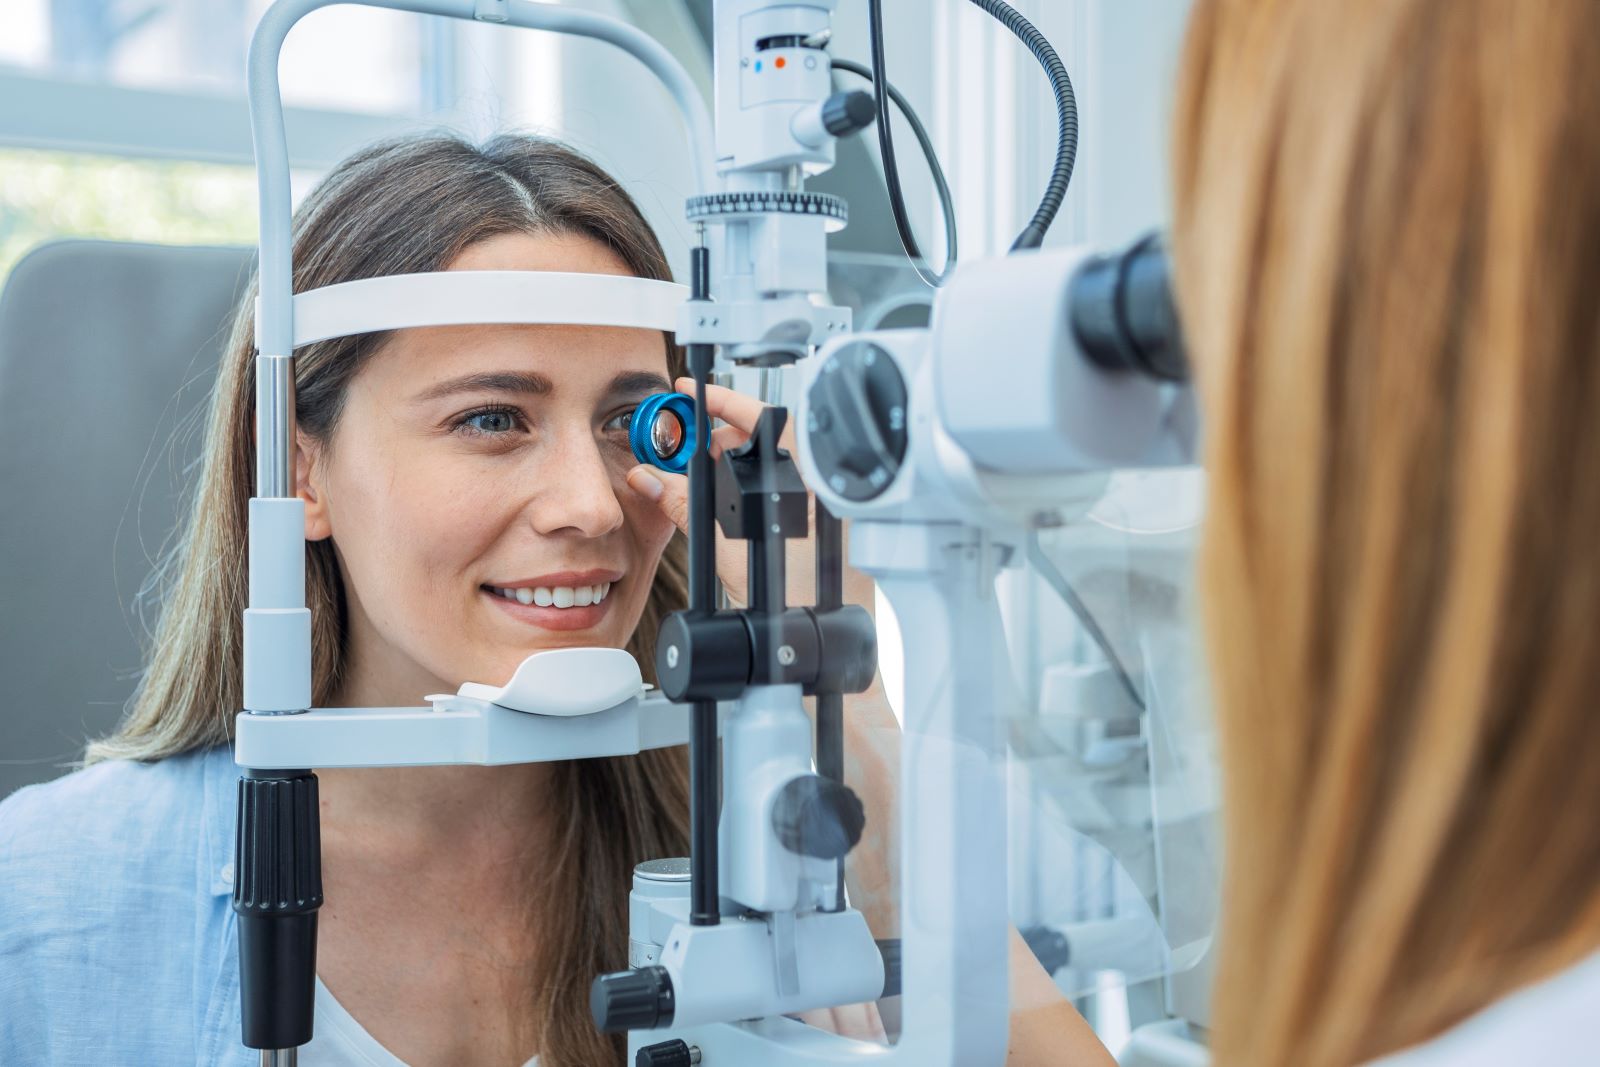 The Best Way to Catch Glaucoma Early? Eye Exams